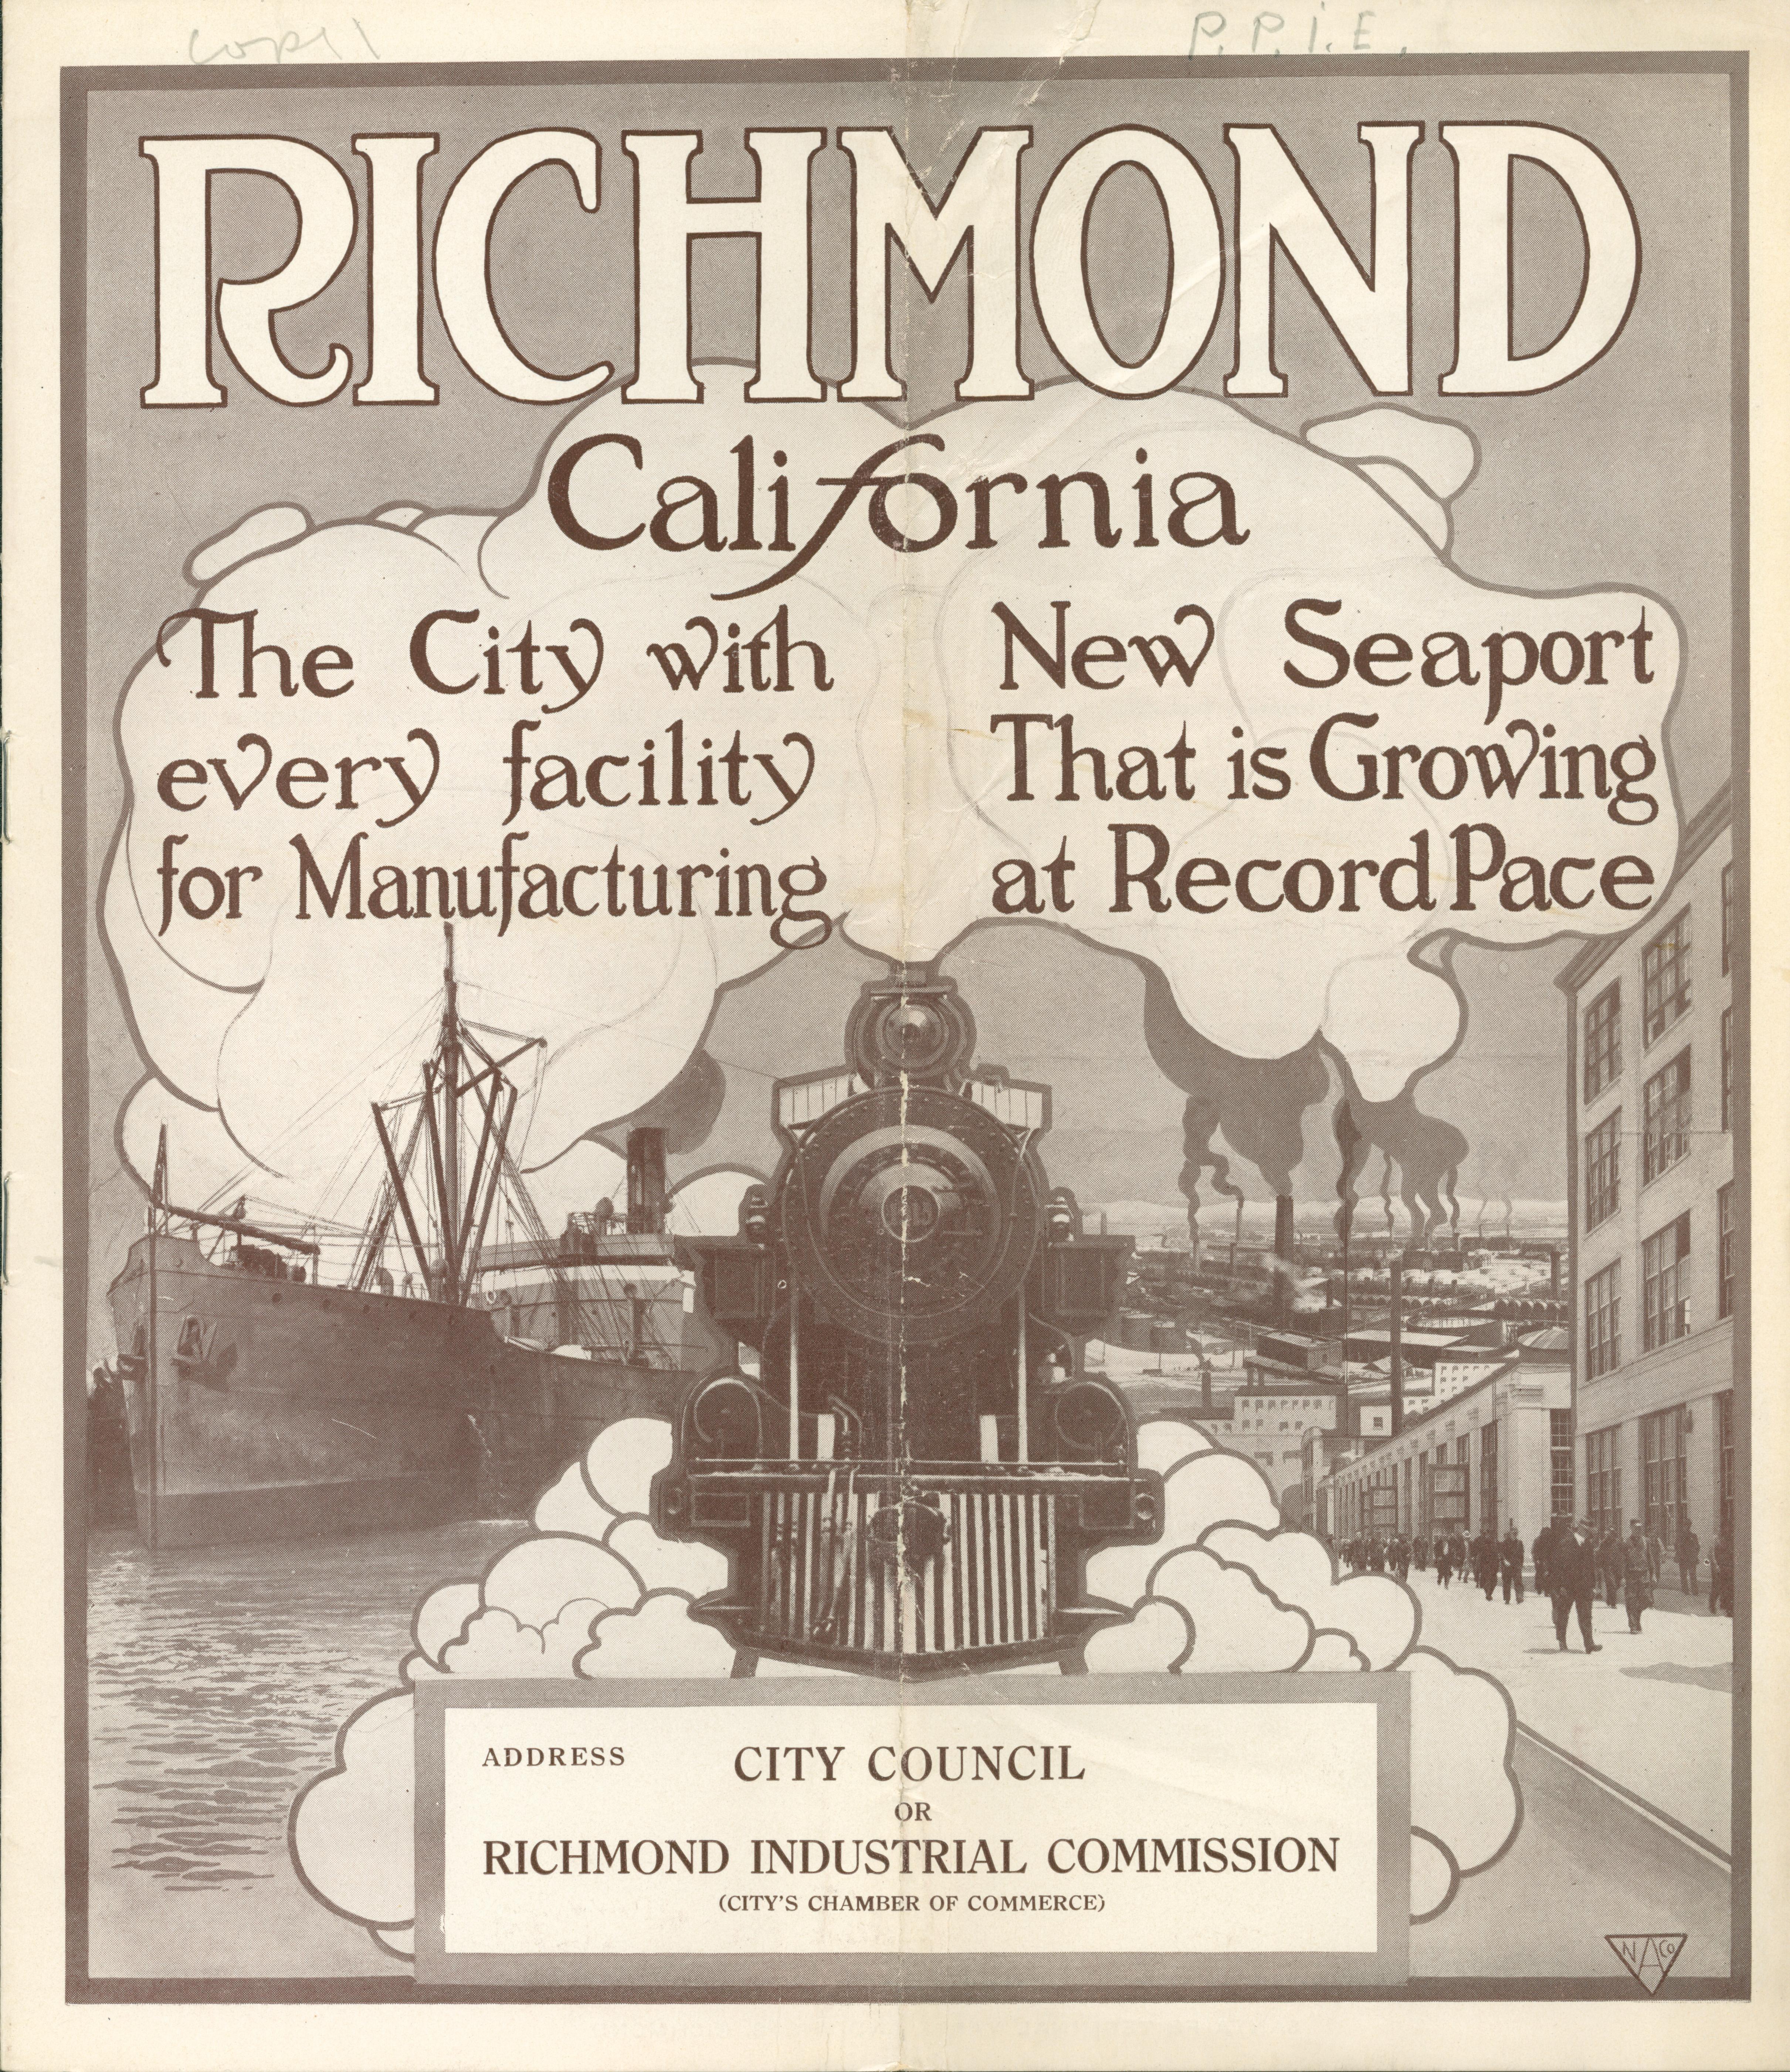 Front shows a railroad engine in the center with a building on the right and a ship on the left